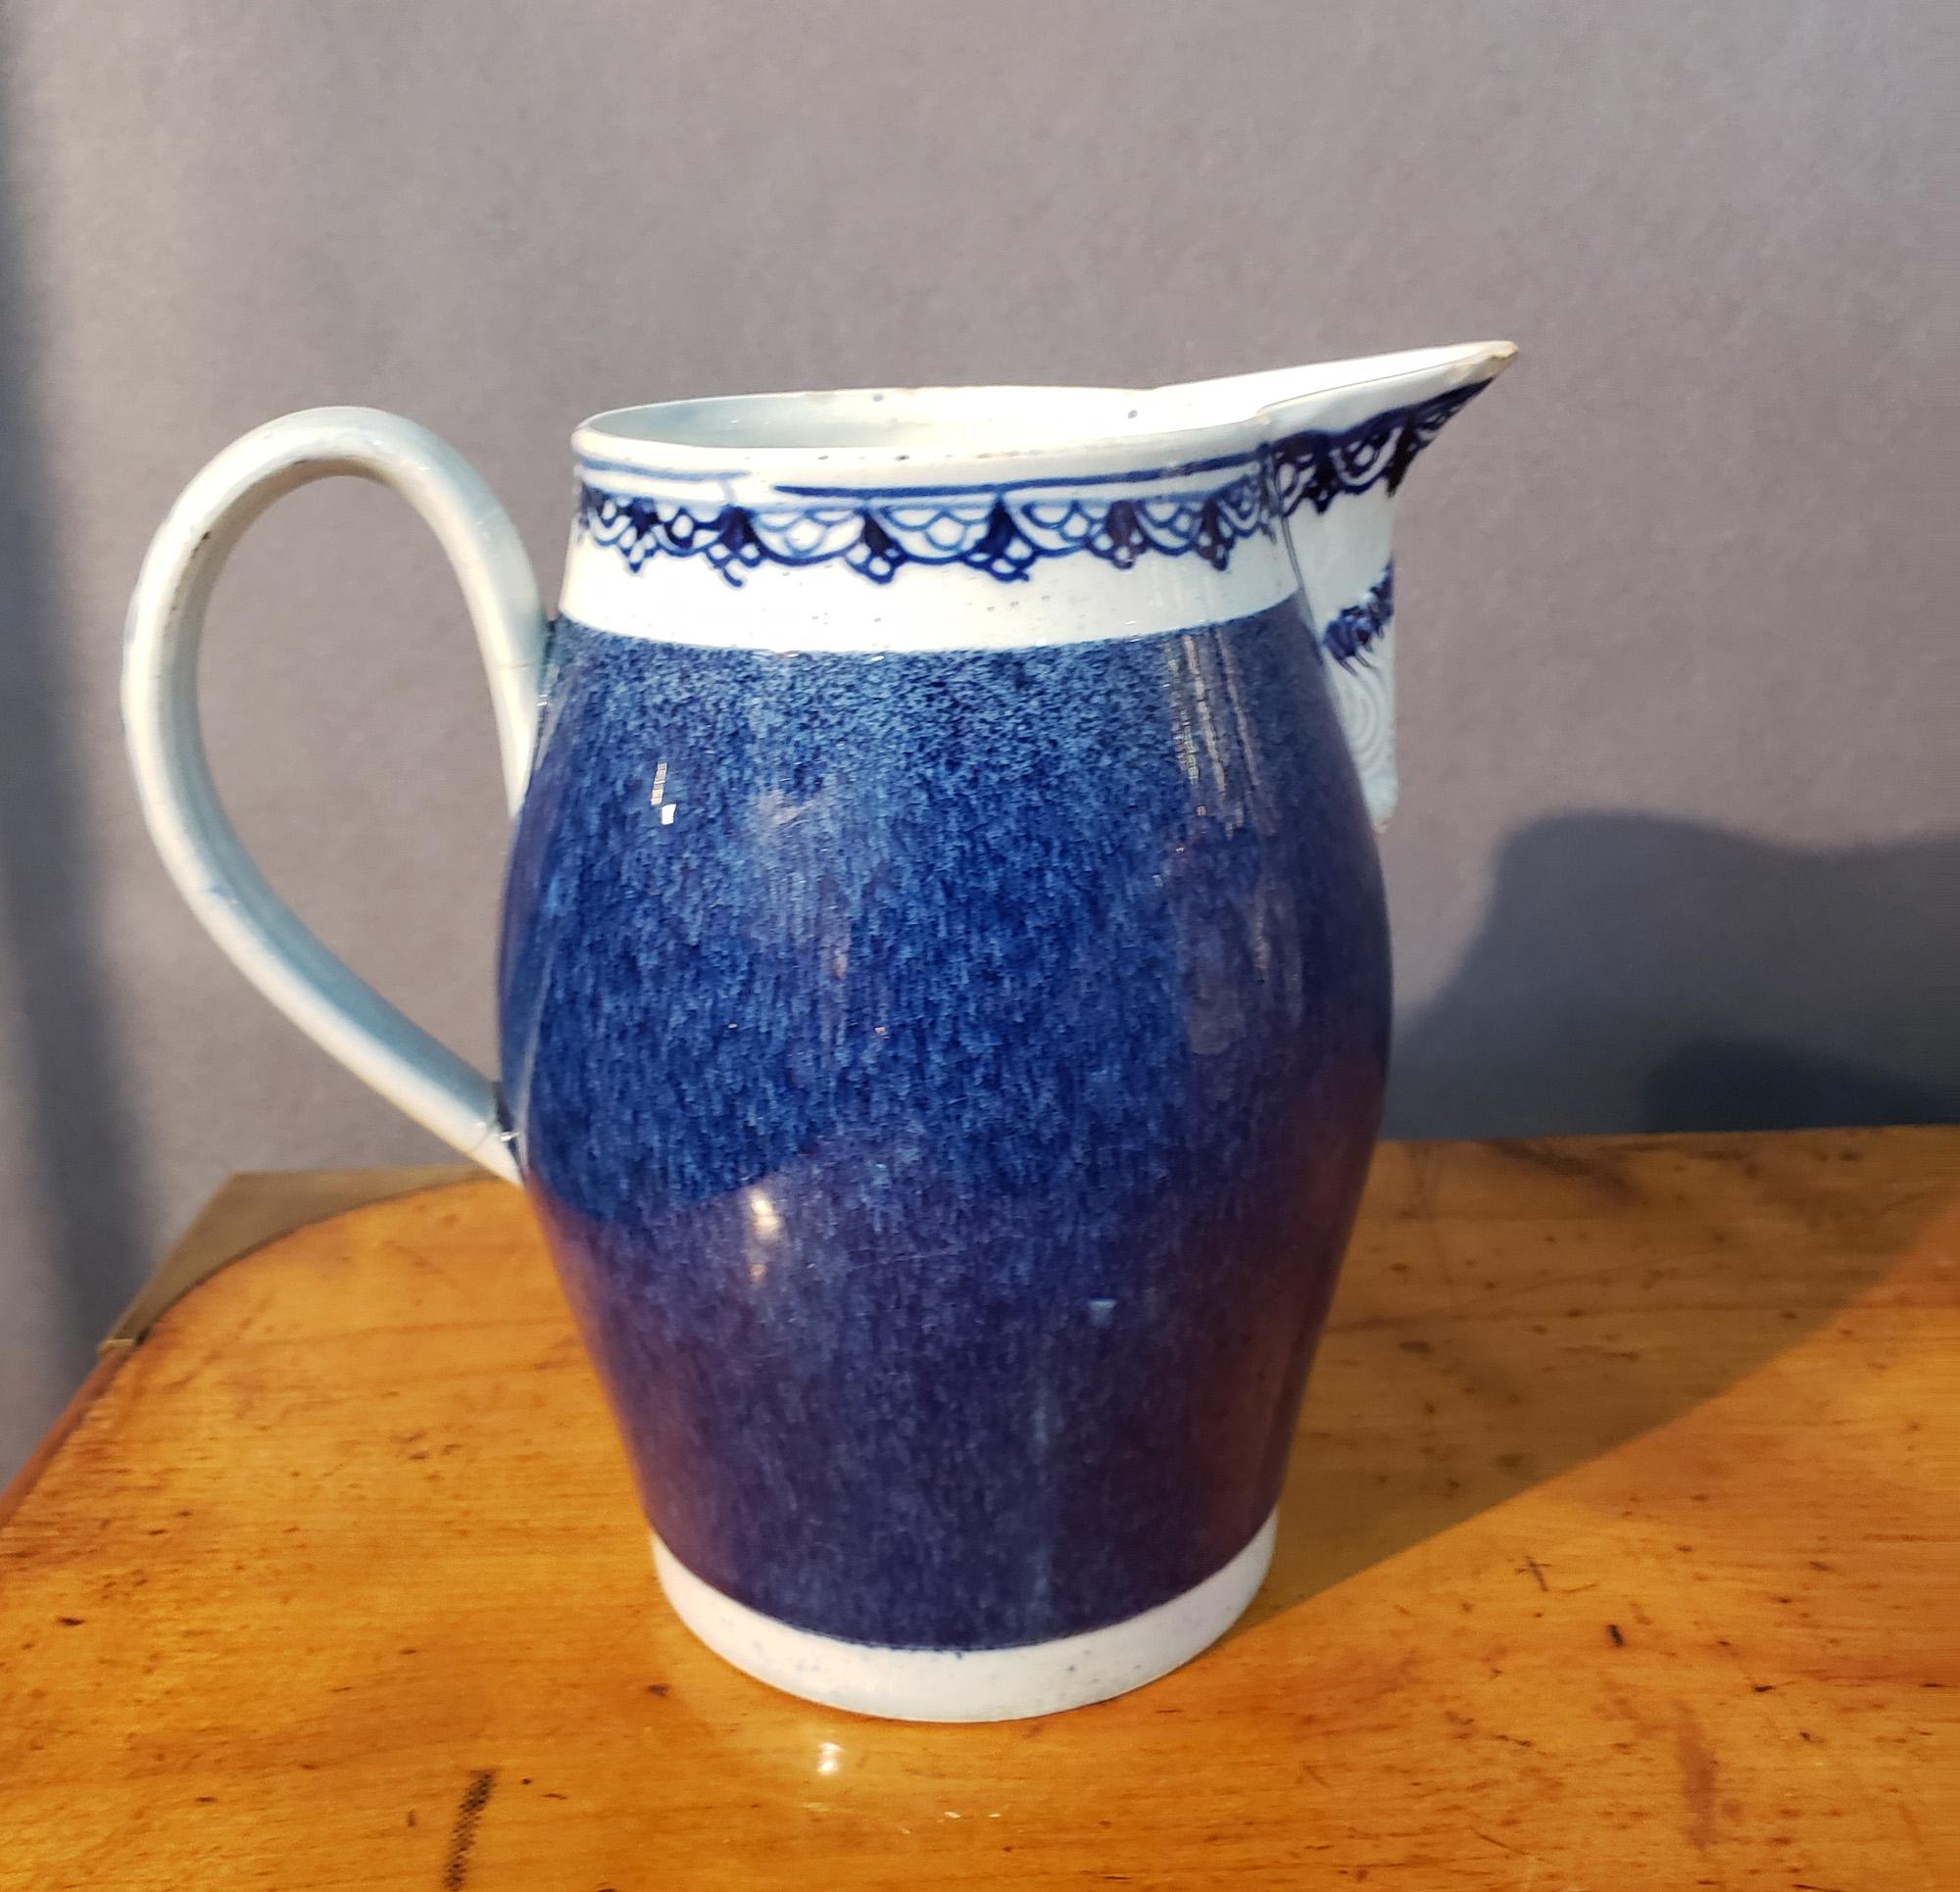 English Pearlware Pottery Jug with Speckled Blue Glaze In Good Condition For Sale In Downingtown, PA